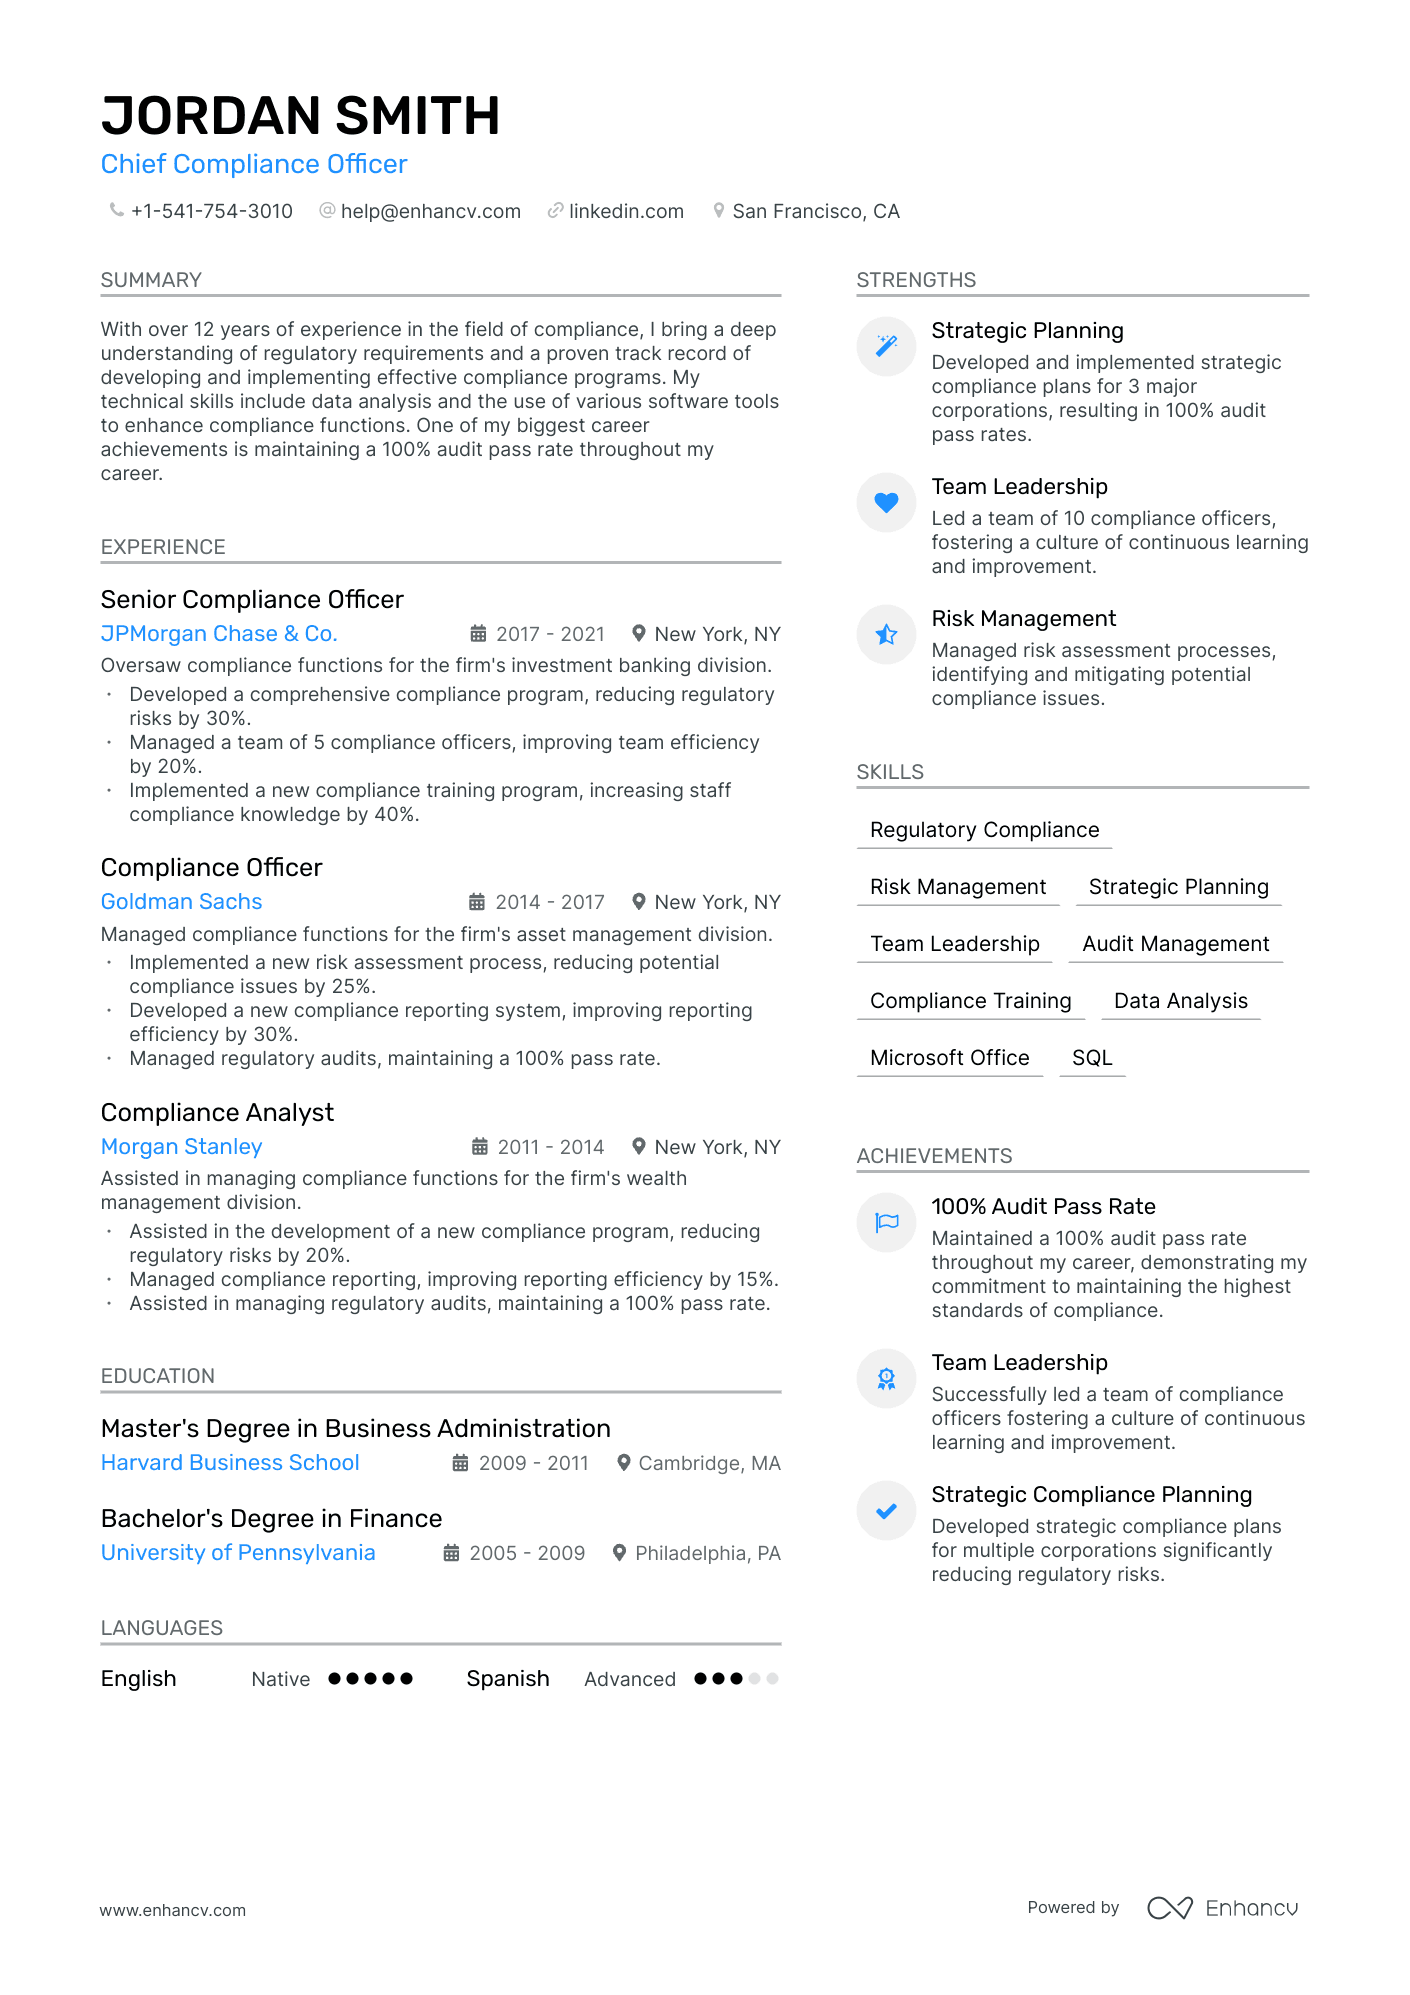 Chief Compliance Officer resume example